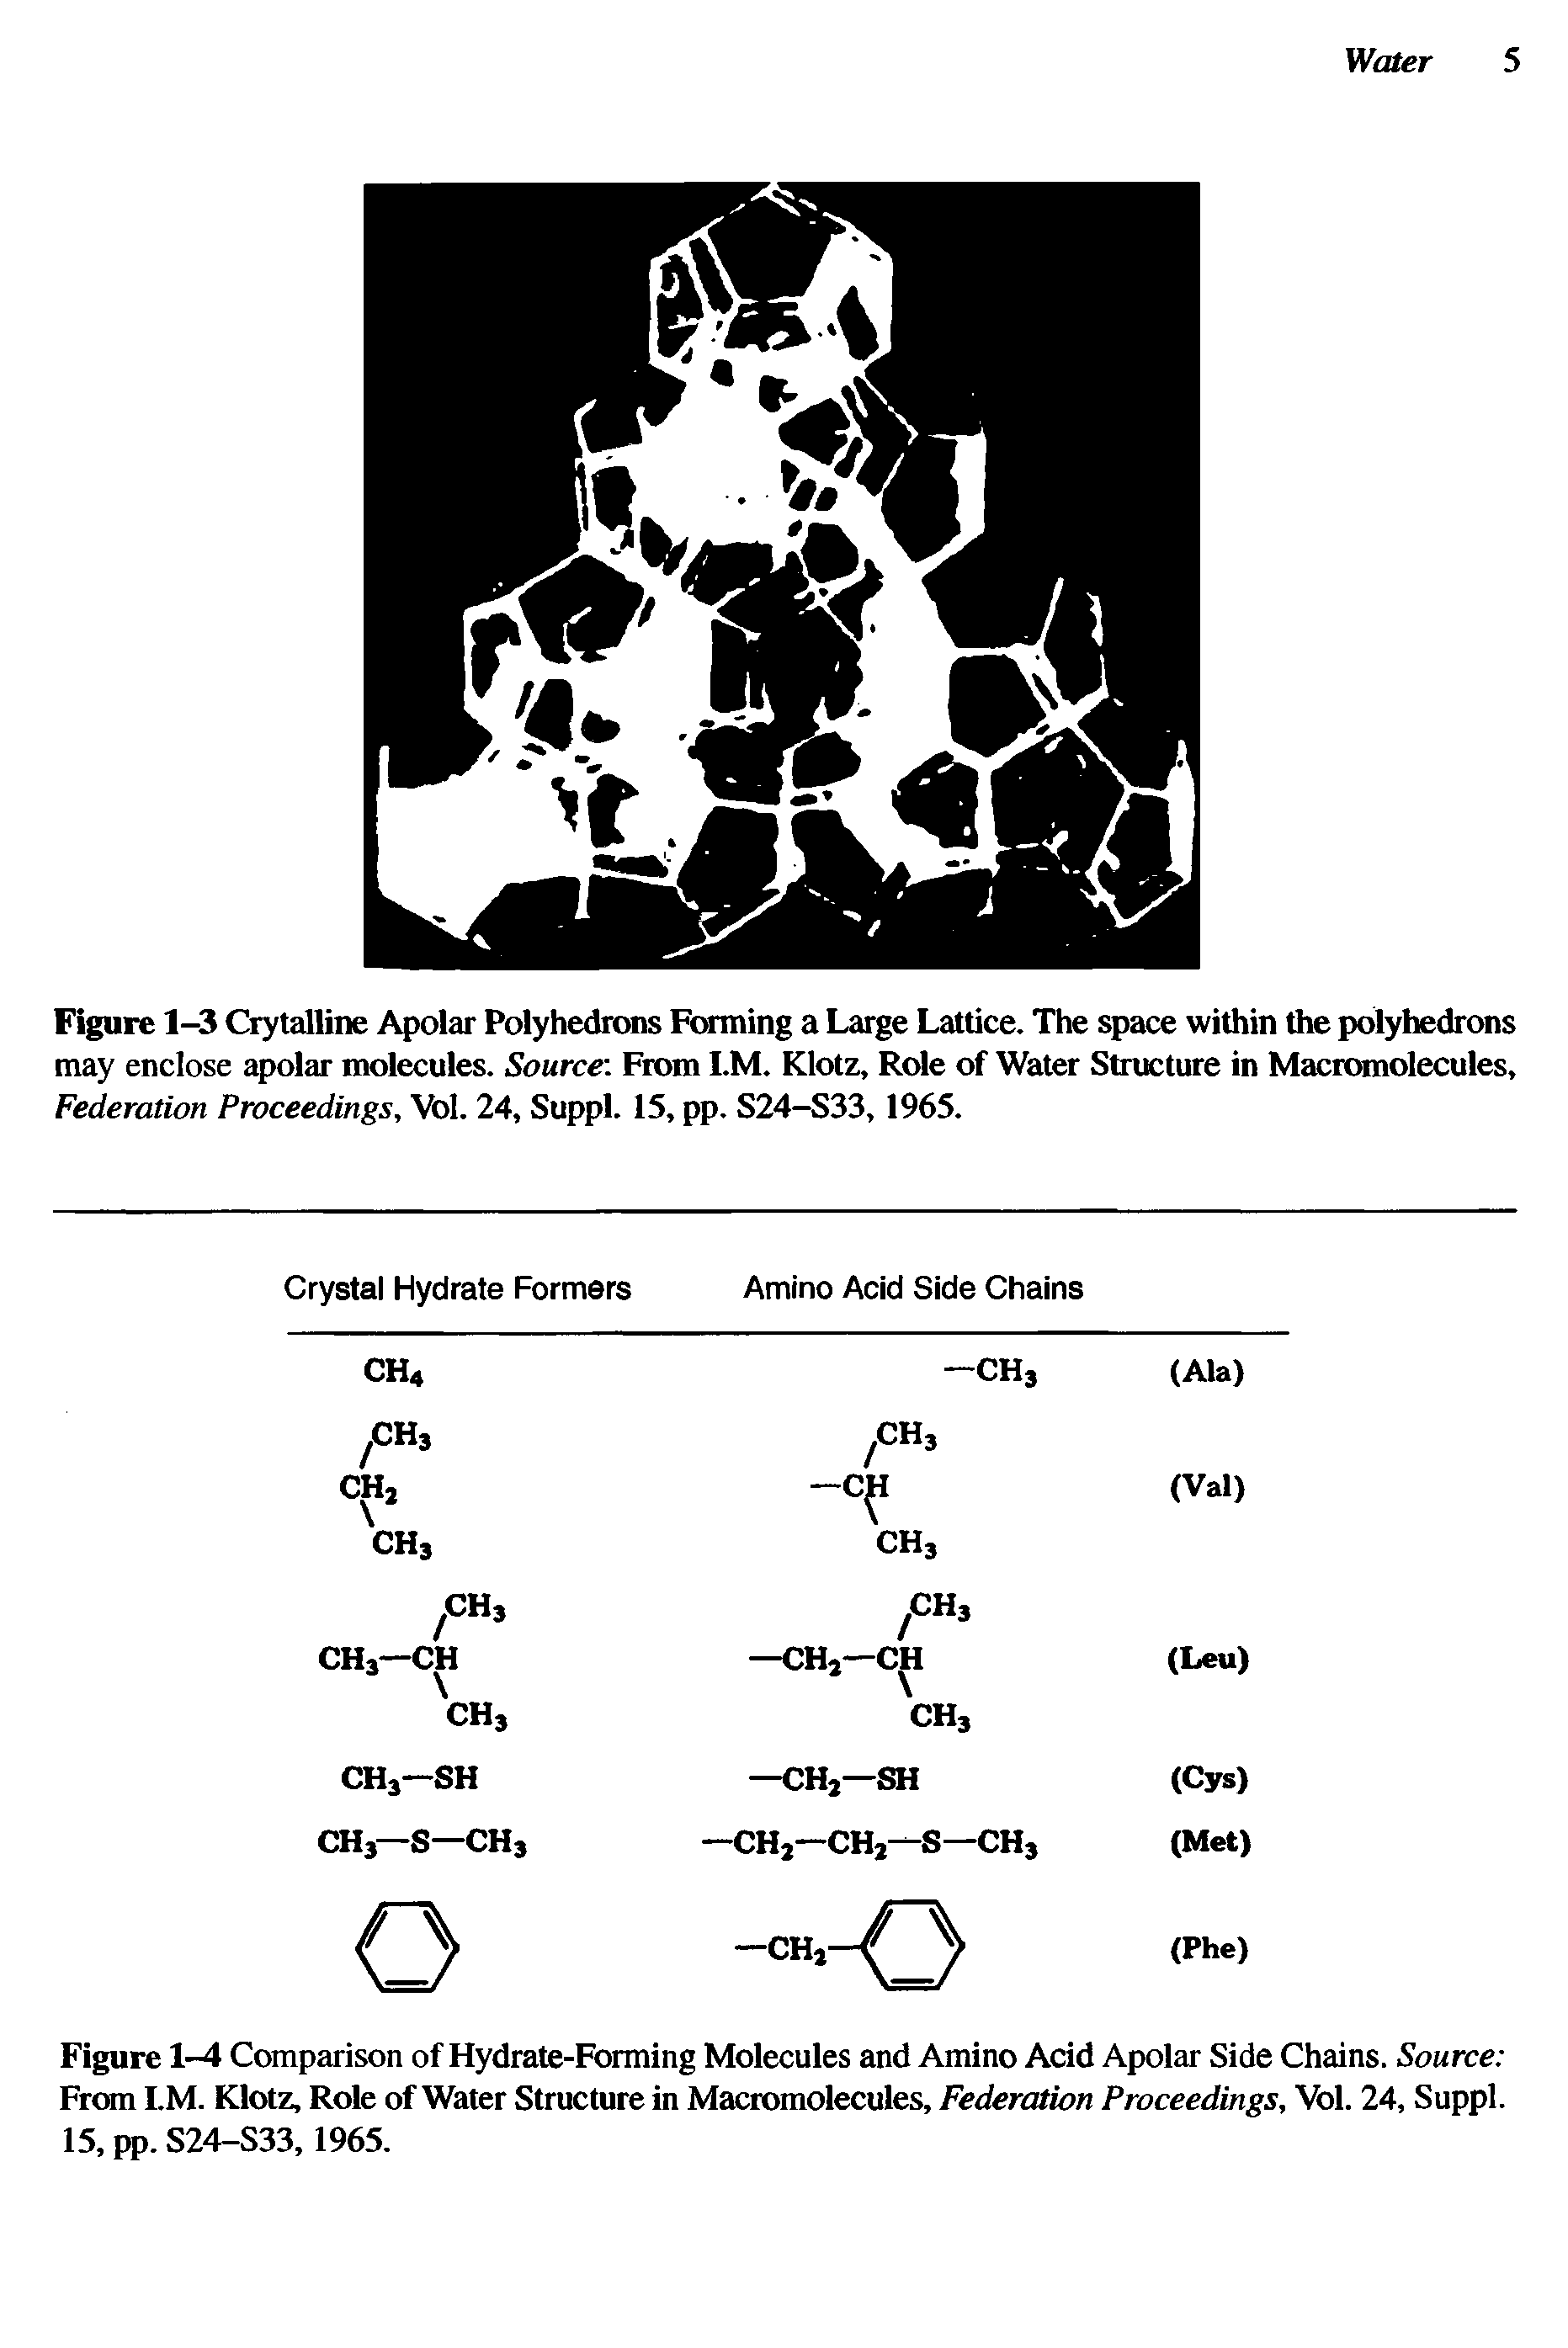 Figure 1-3 Crytalline Apolar Polyhedrons Forming a Large Lattice. The space within the polyhedrons may enclose apolar molecules. Source-. From I.M. Klotz, Role of Water Structure in Macromolecules, Federation Proceedings, Vol. 24, Suppl. 15, pp. S24-S33,1965.